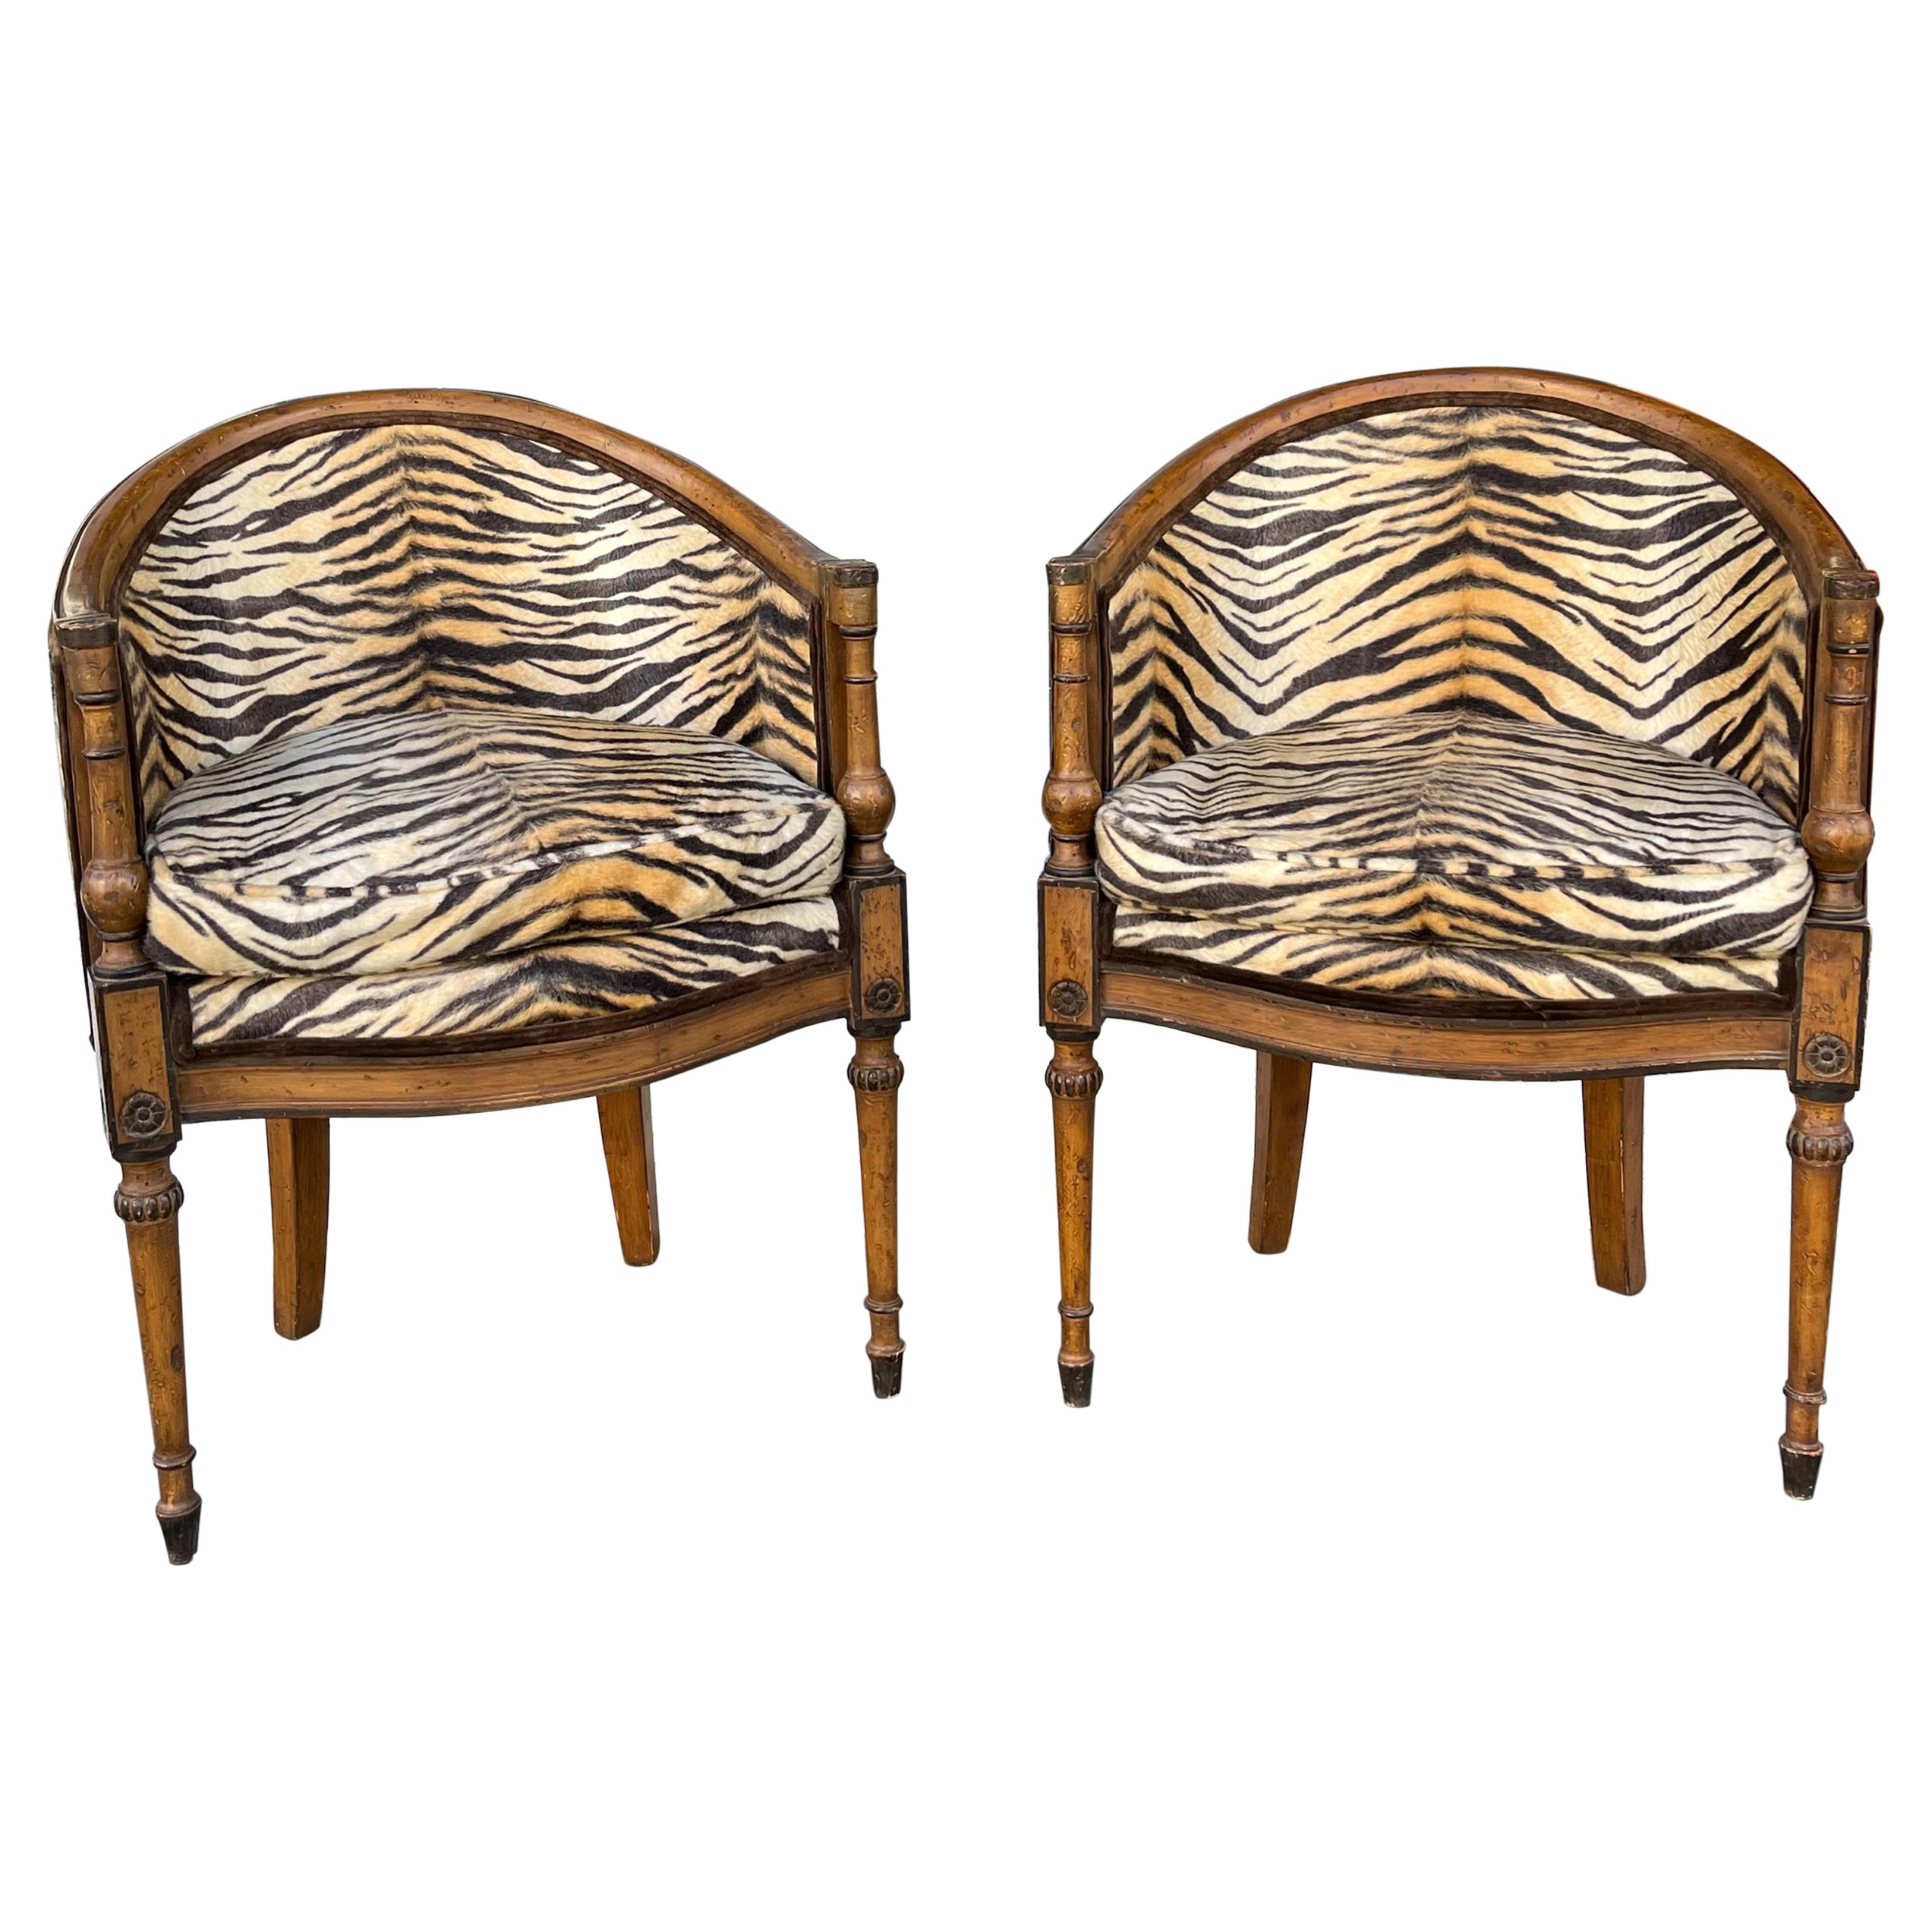 Pair of Meyer Gunther and Martini Walnut Armchairs in Faux Fur Fabric